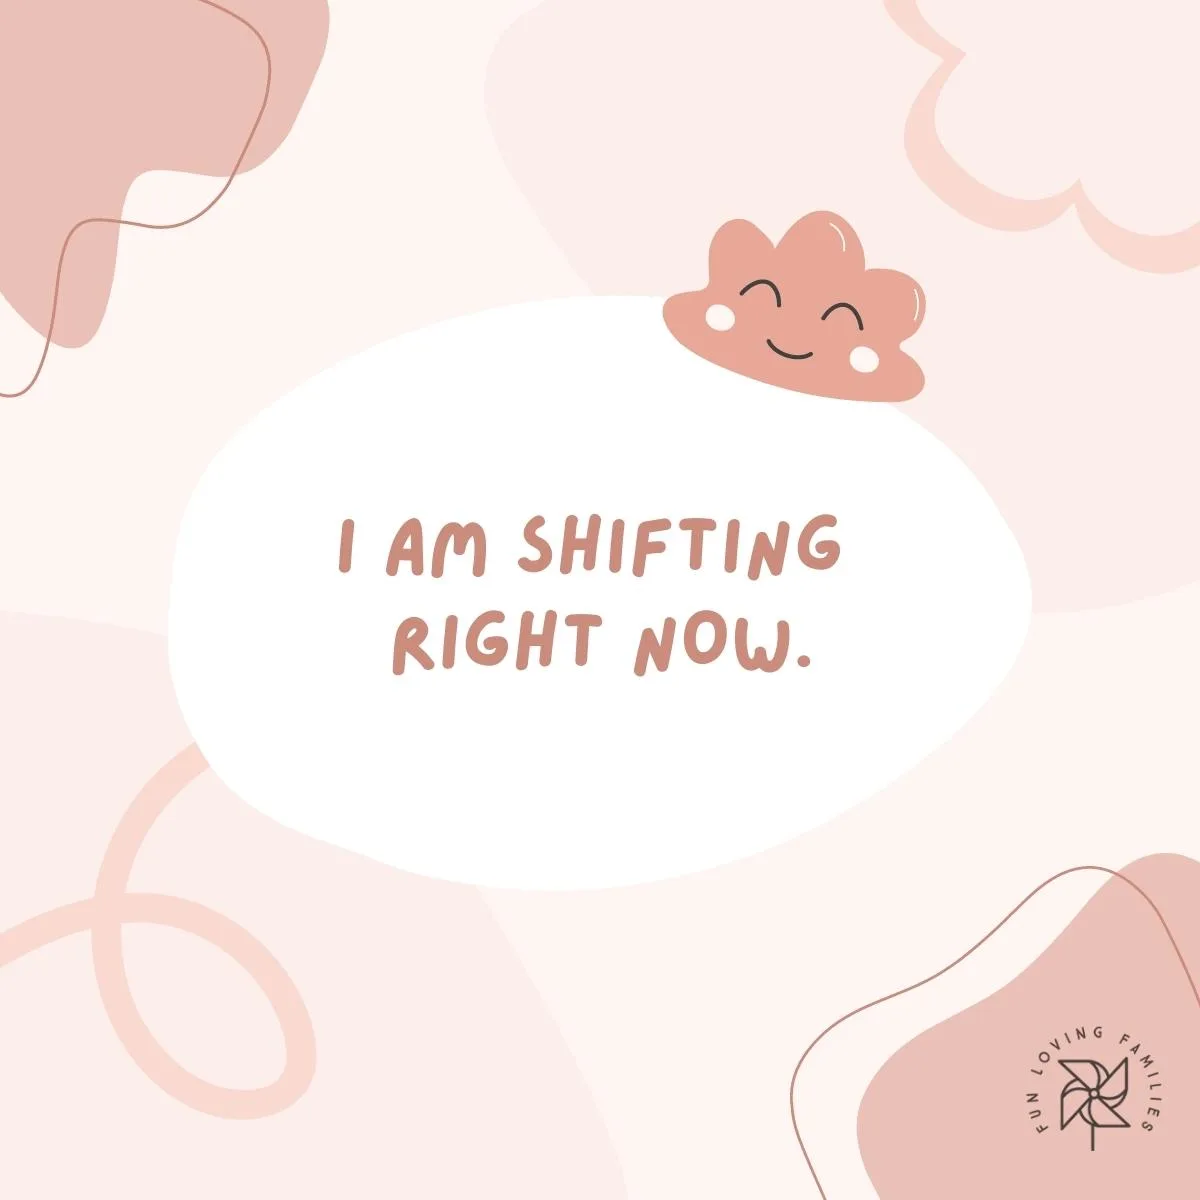 I am shifting right now affirmation